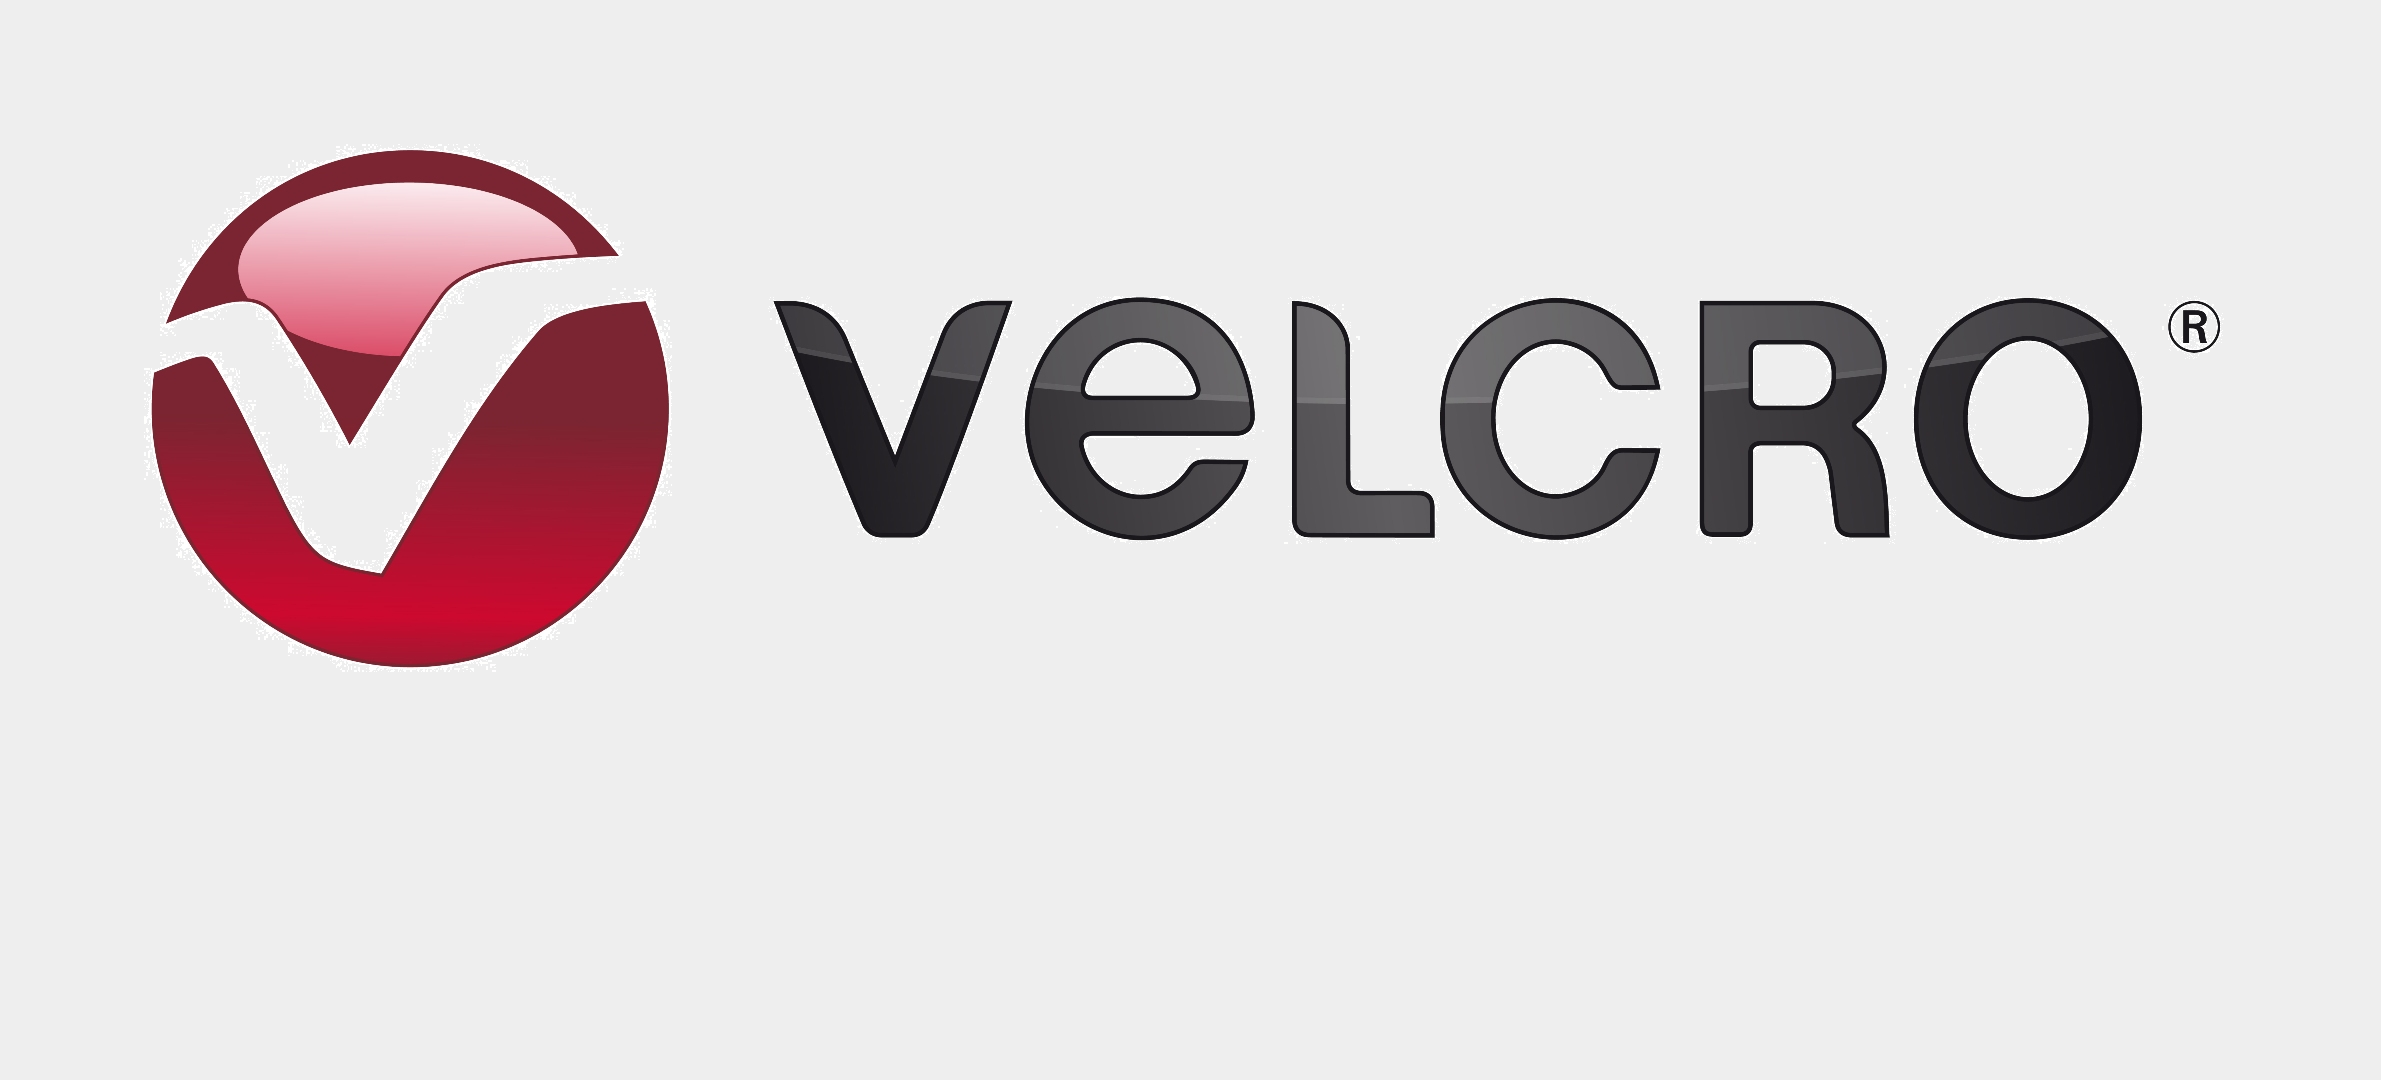 velcro company logo_Partner accord banners and sign supplies